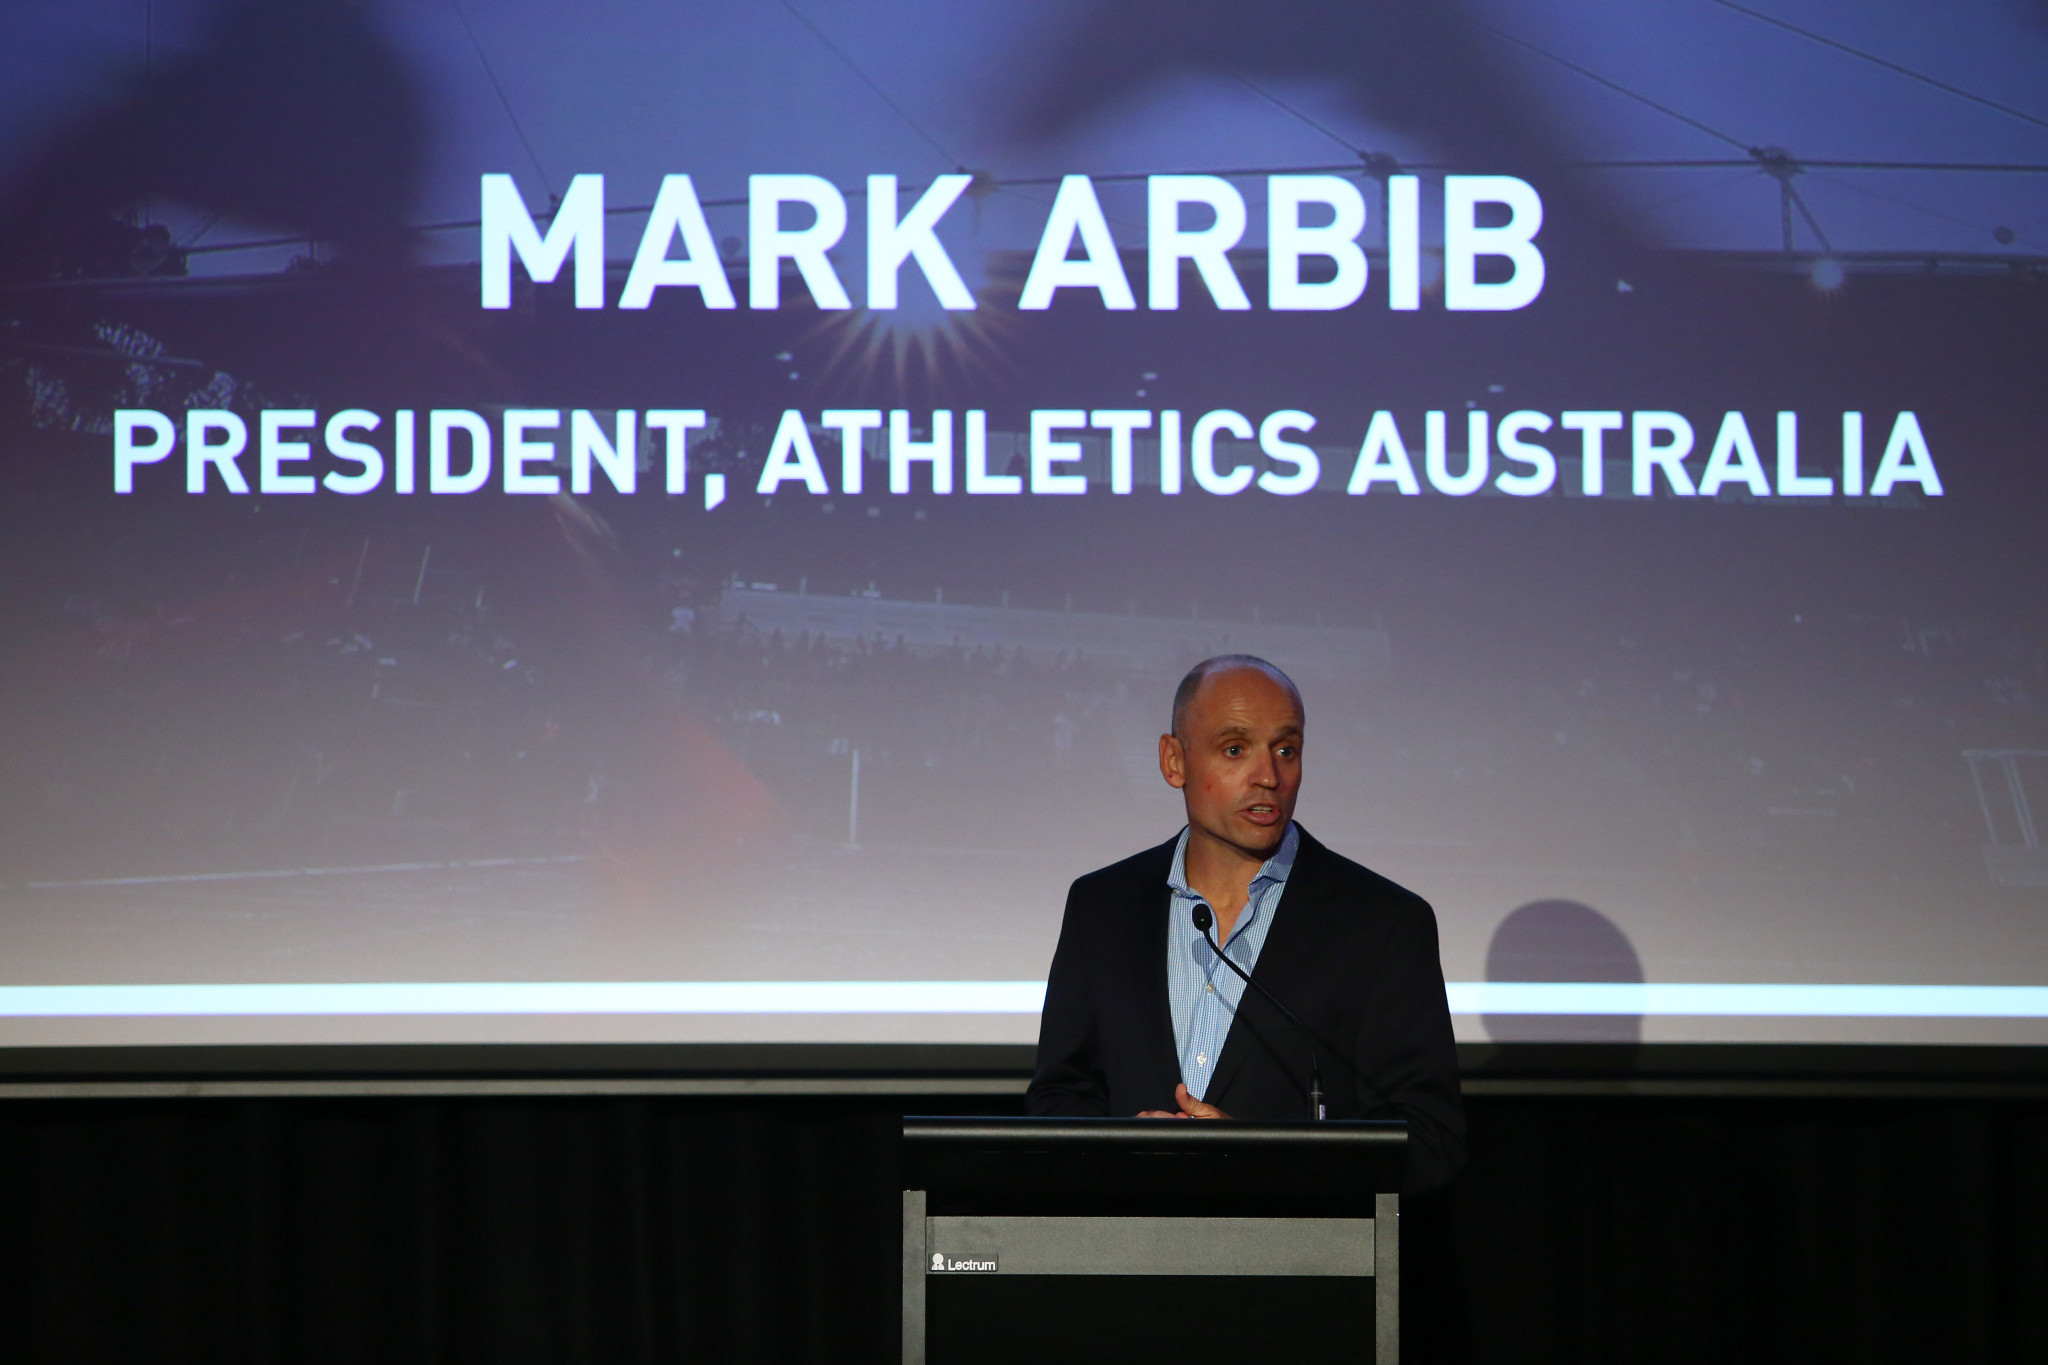 Jan Swinhoe will replace Mark Arbib as President of Athletics Australia after he stepped down following six years as head of the governing body ©Getty Images